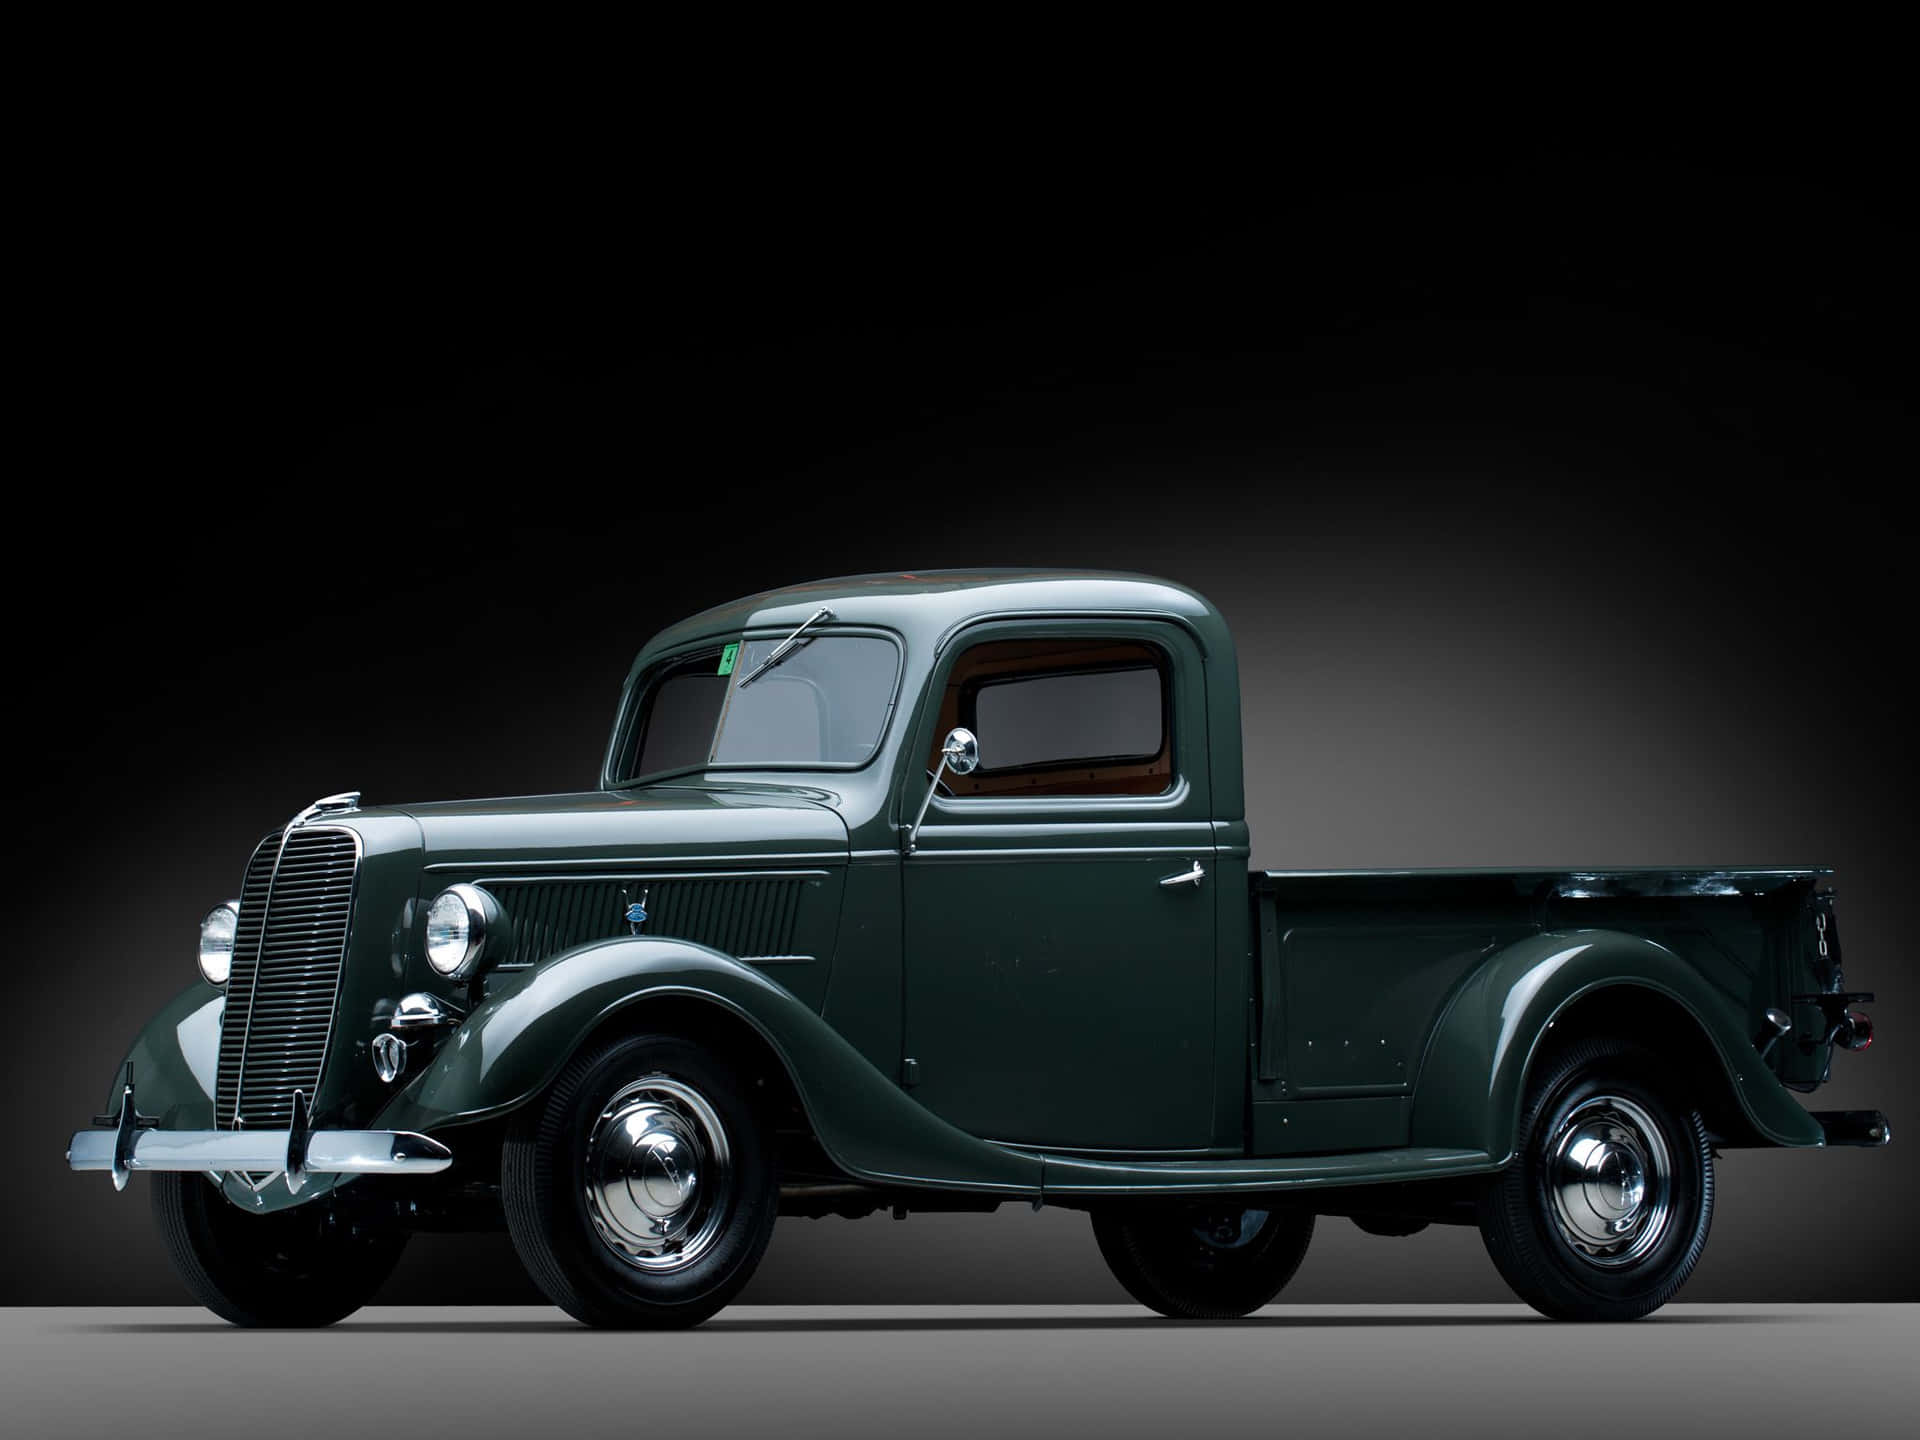 The classic American Ford pickup truck Wallpaper